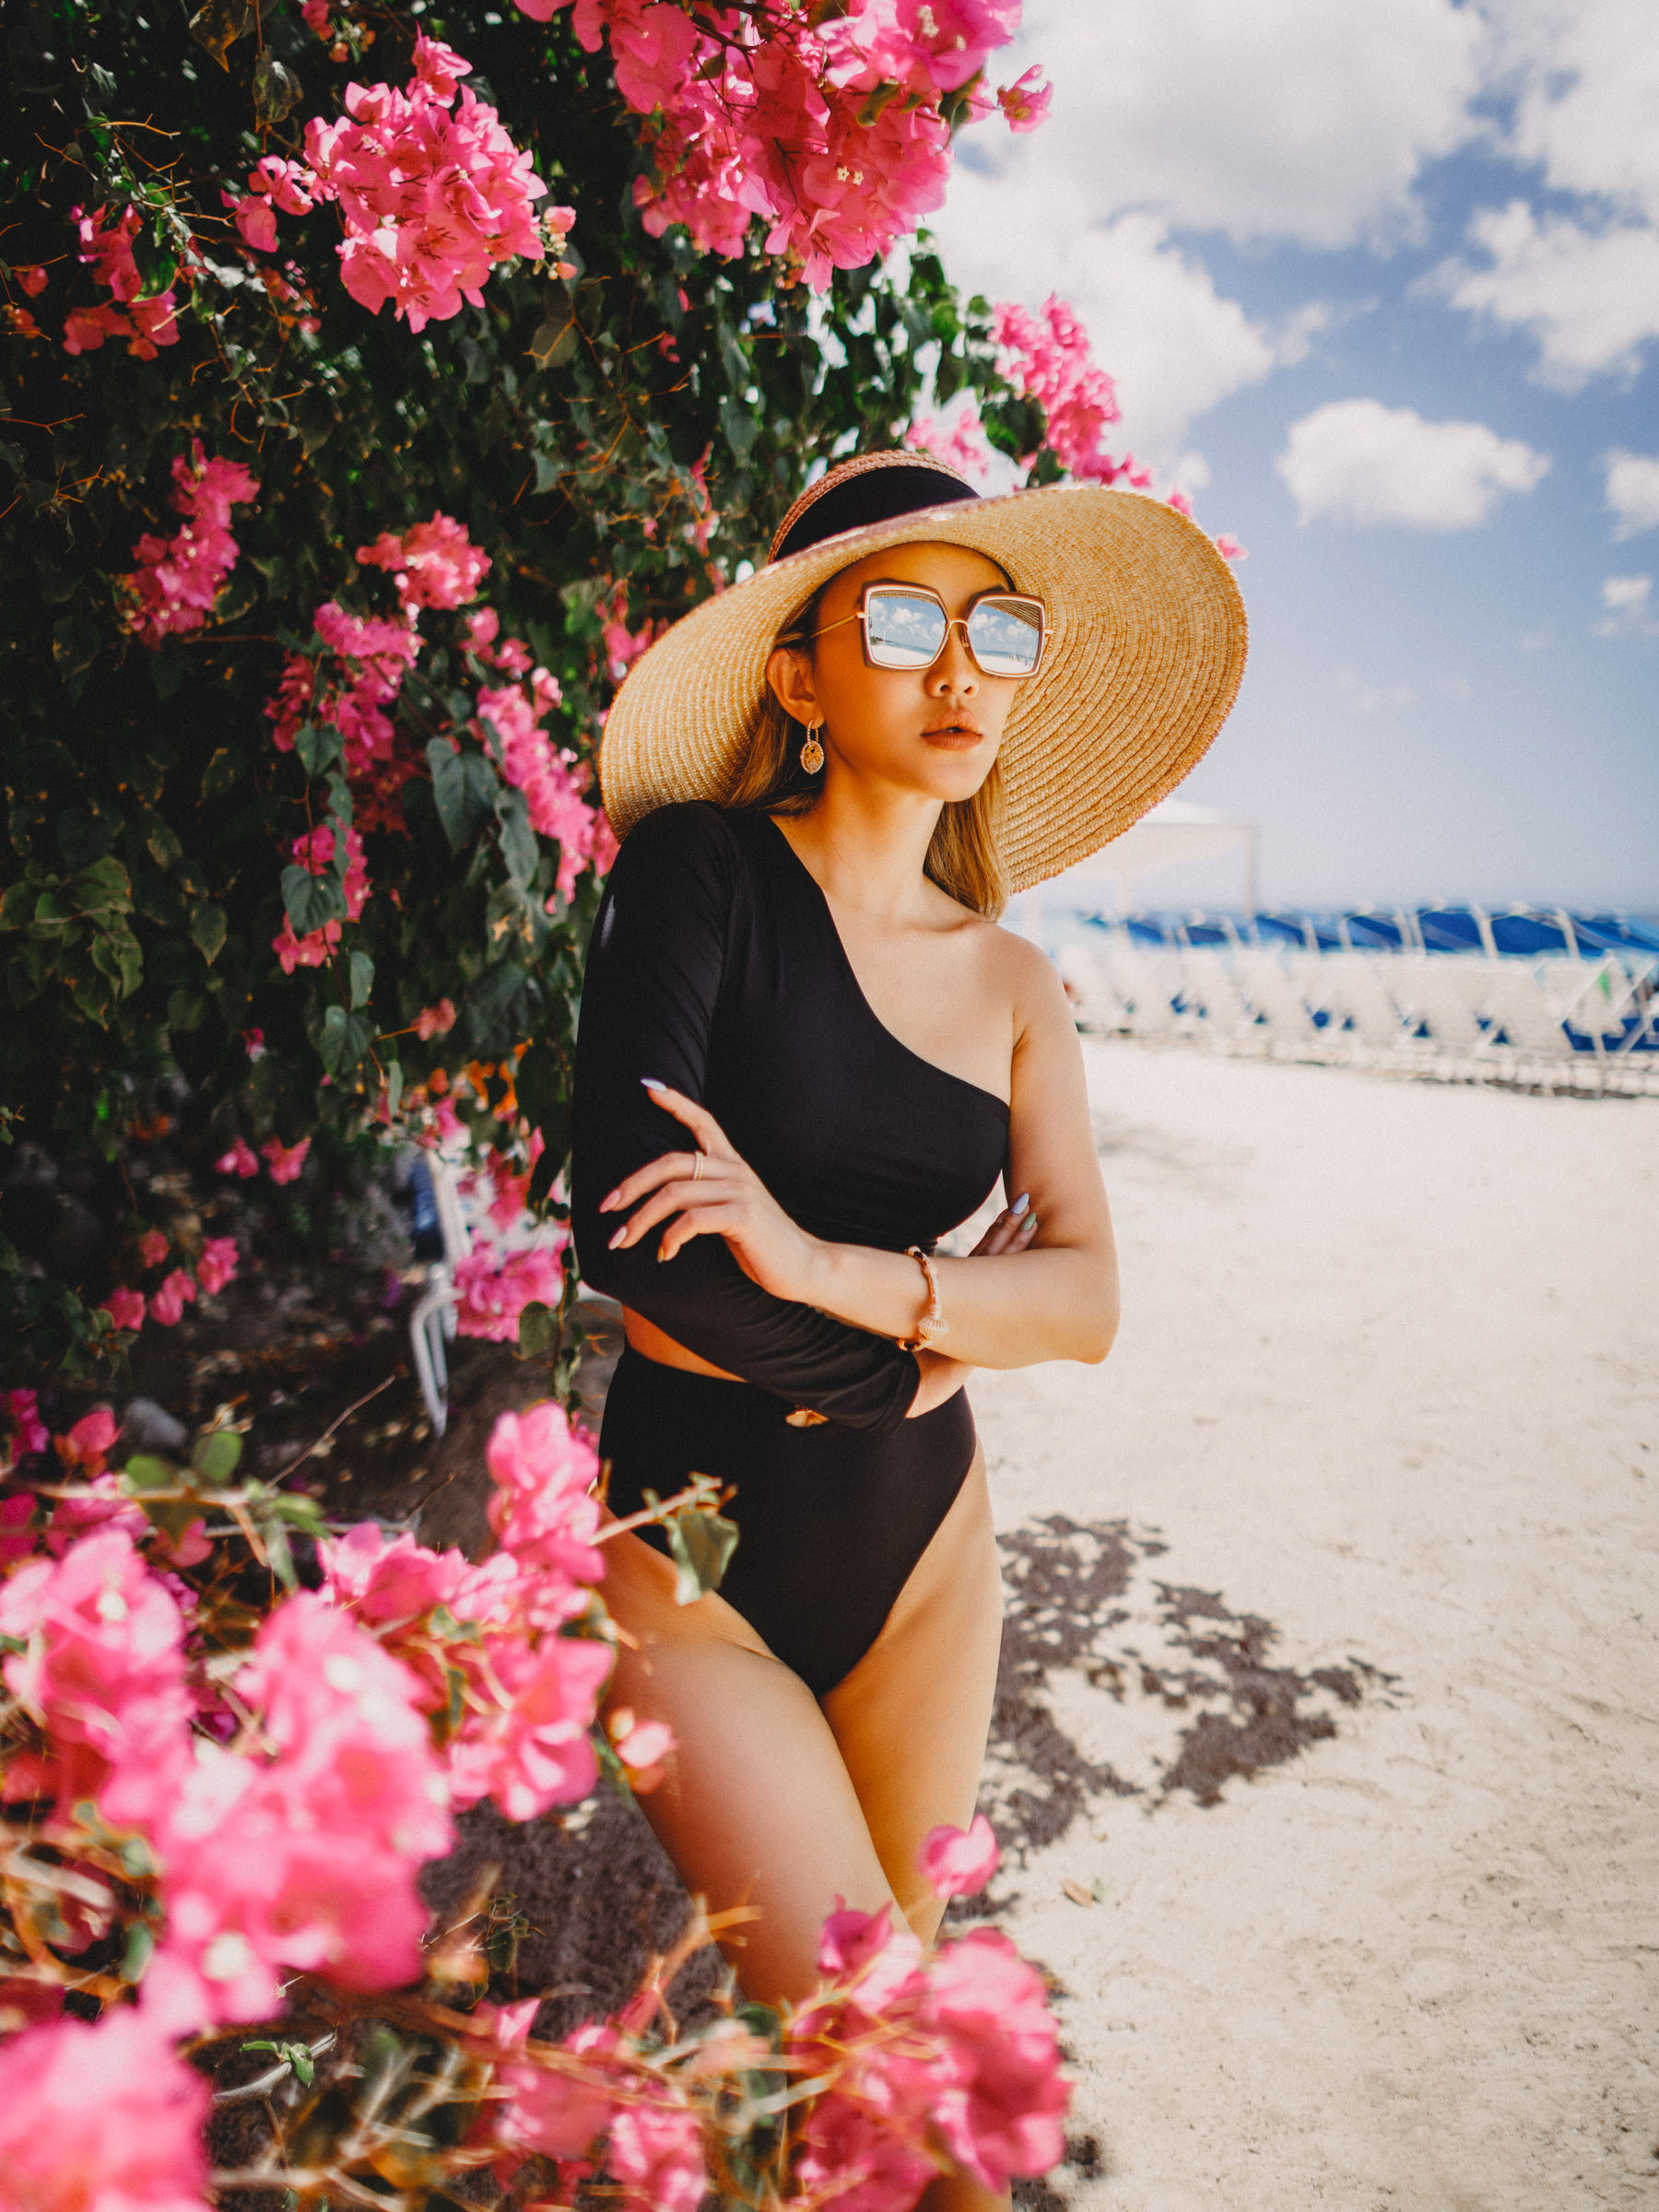 summer trends to retire, cutout swimsuit, straw hat // Notjessfashion.com